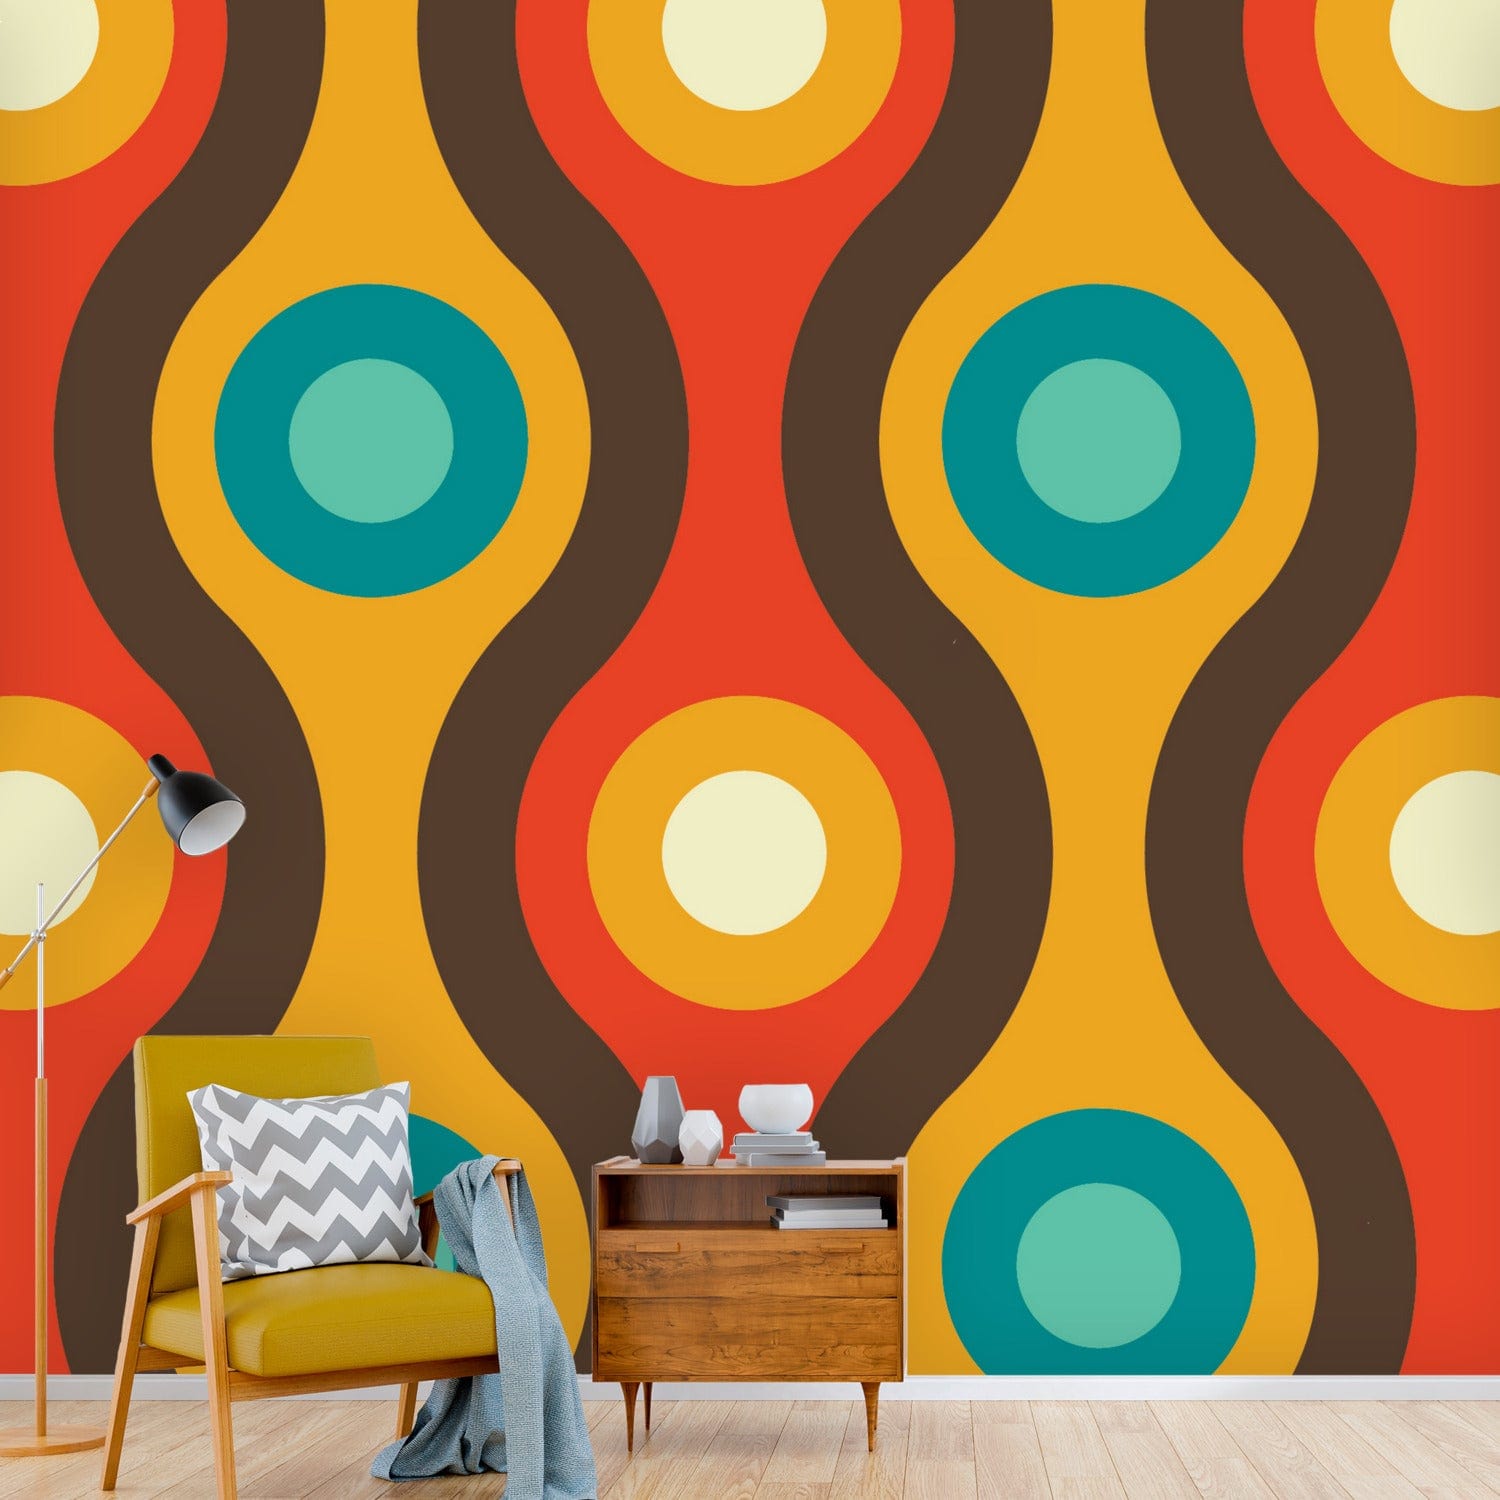 Mid Century Modern Googie Peel And Stick Retro Brown, Mustard Yellow, Teal Blue MCM Wall Murals Wallpaper H110 x W120